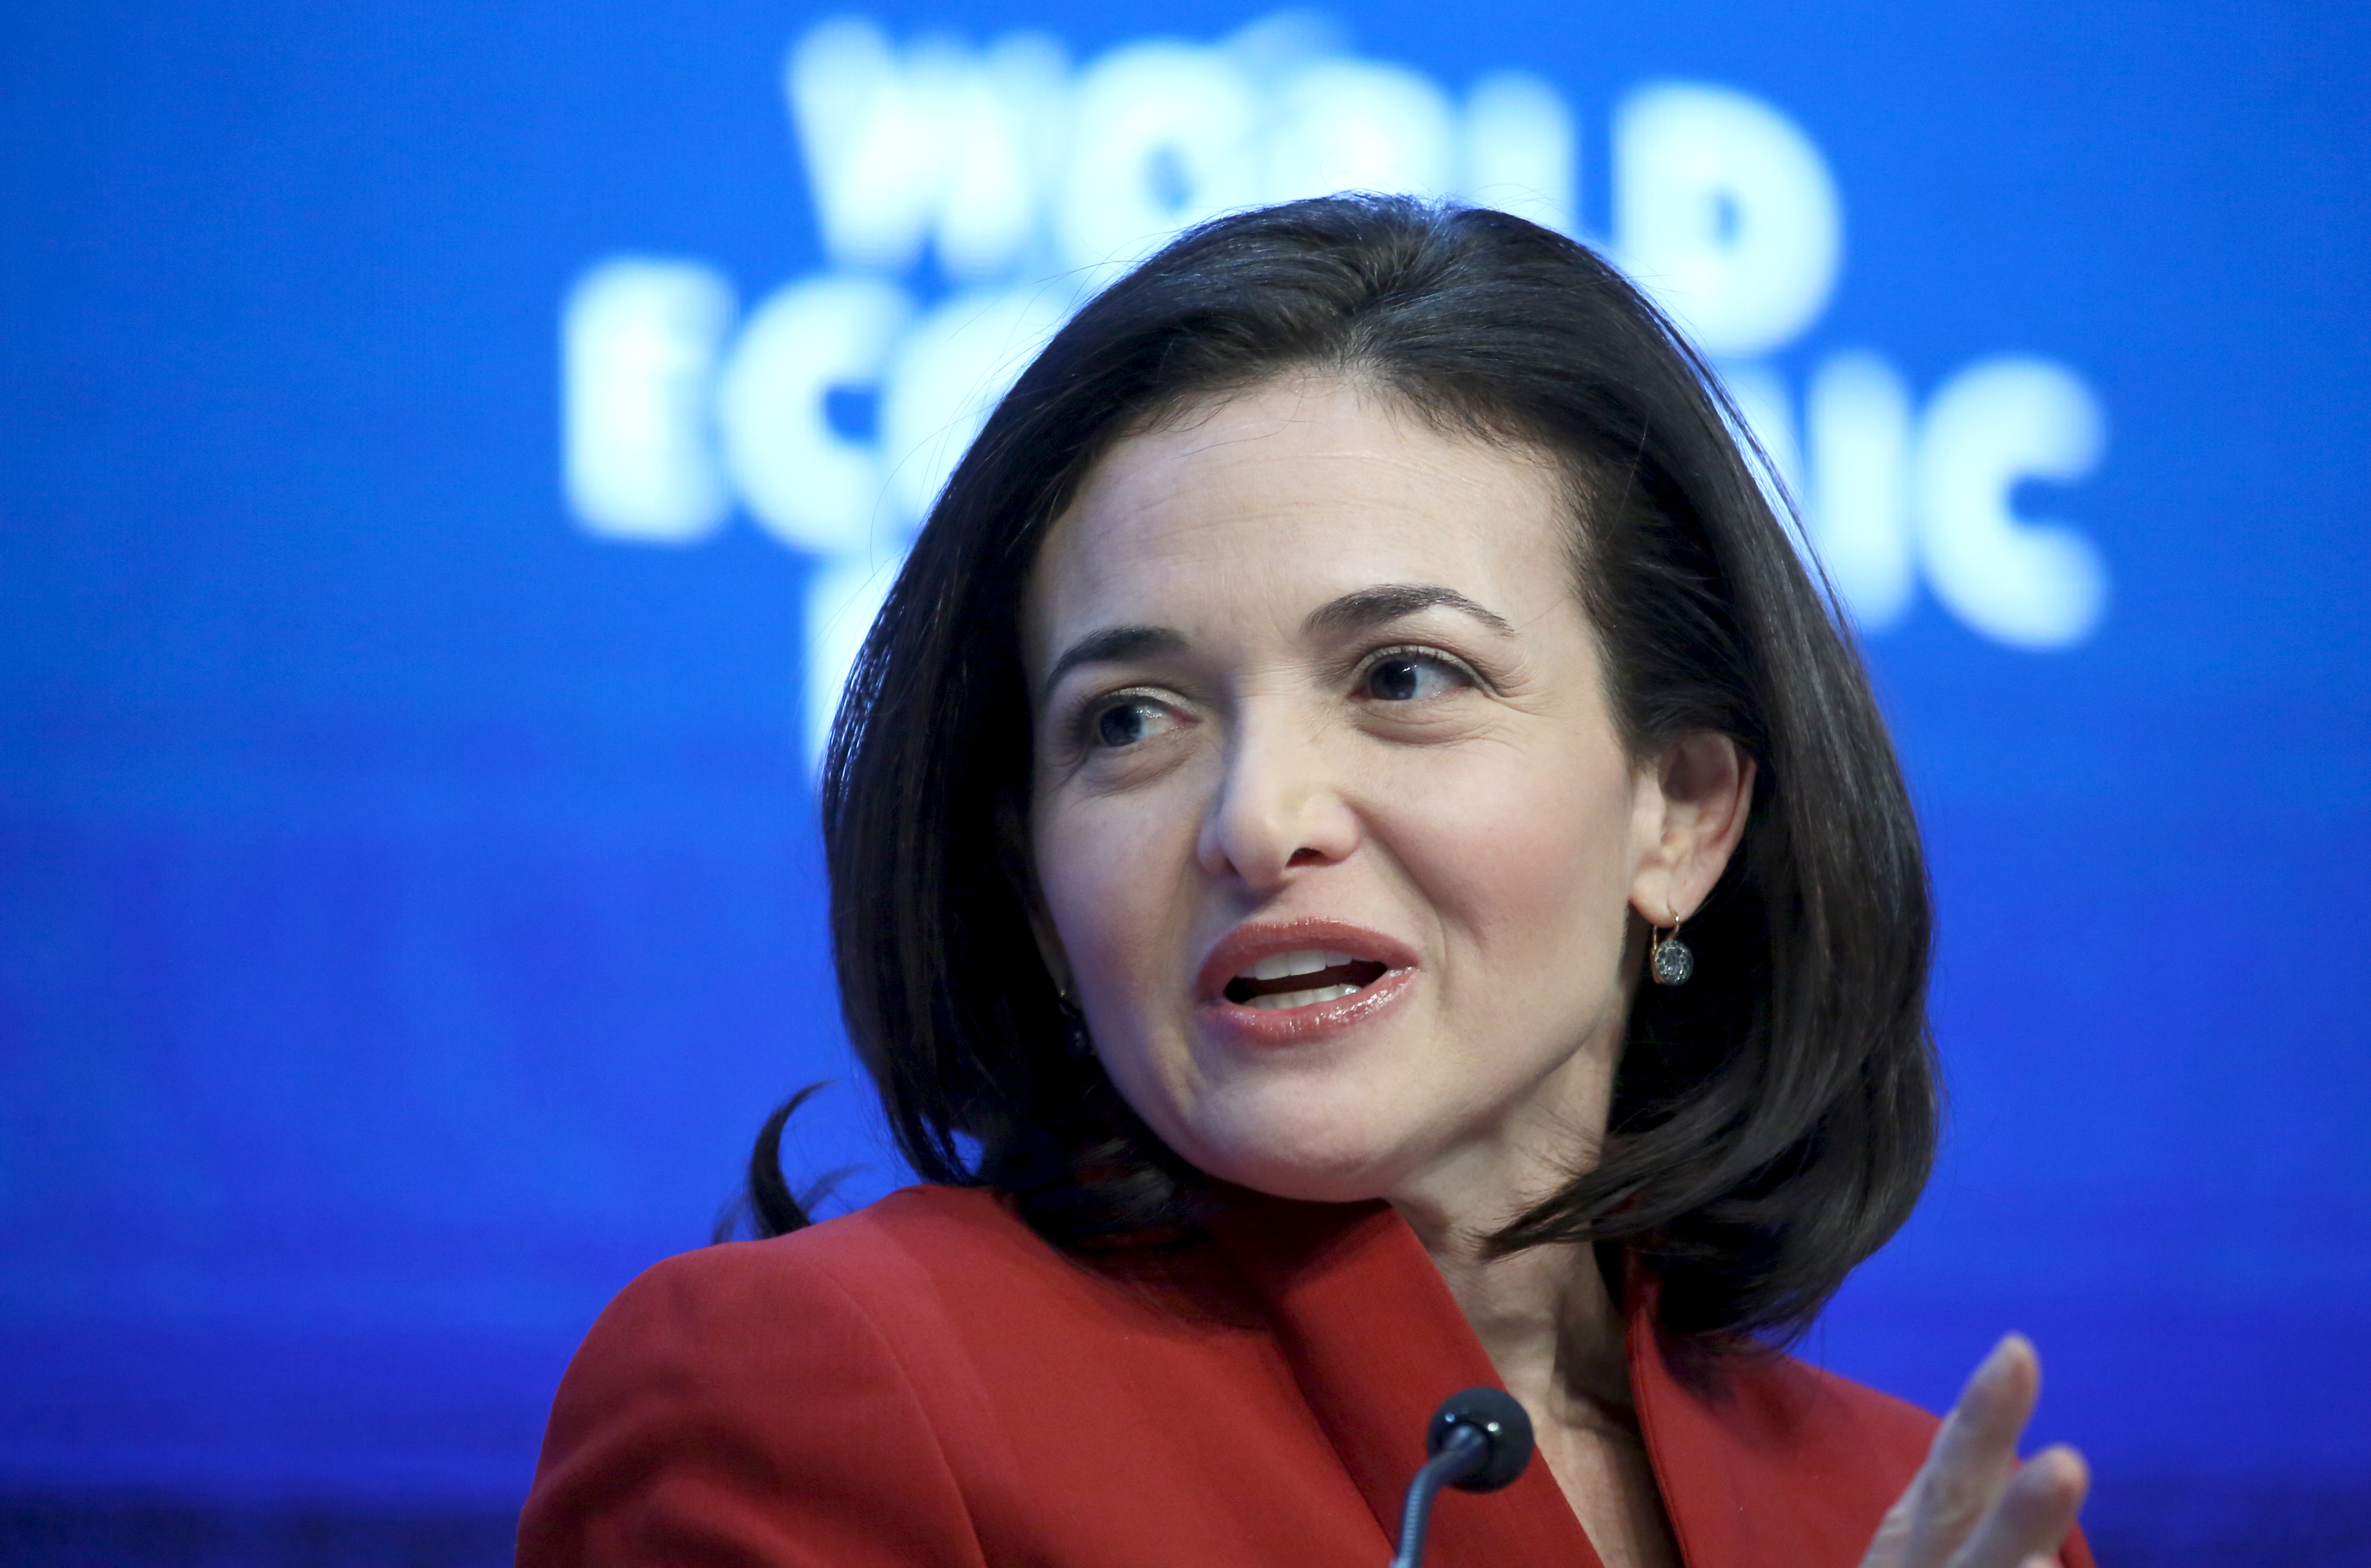 Sheryl Sandberg, billionaire and chief operating officer of Facebook Inc., speaks during a session on day two of the World Economic Forum (WEF) in Davos, Switzerland, on Thursday, Jan. 22, 2015. (Chris Ratcliffe—Bloomberg/Getty Images)